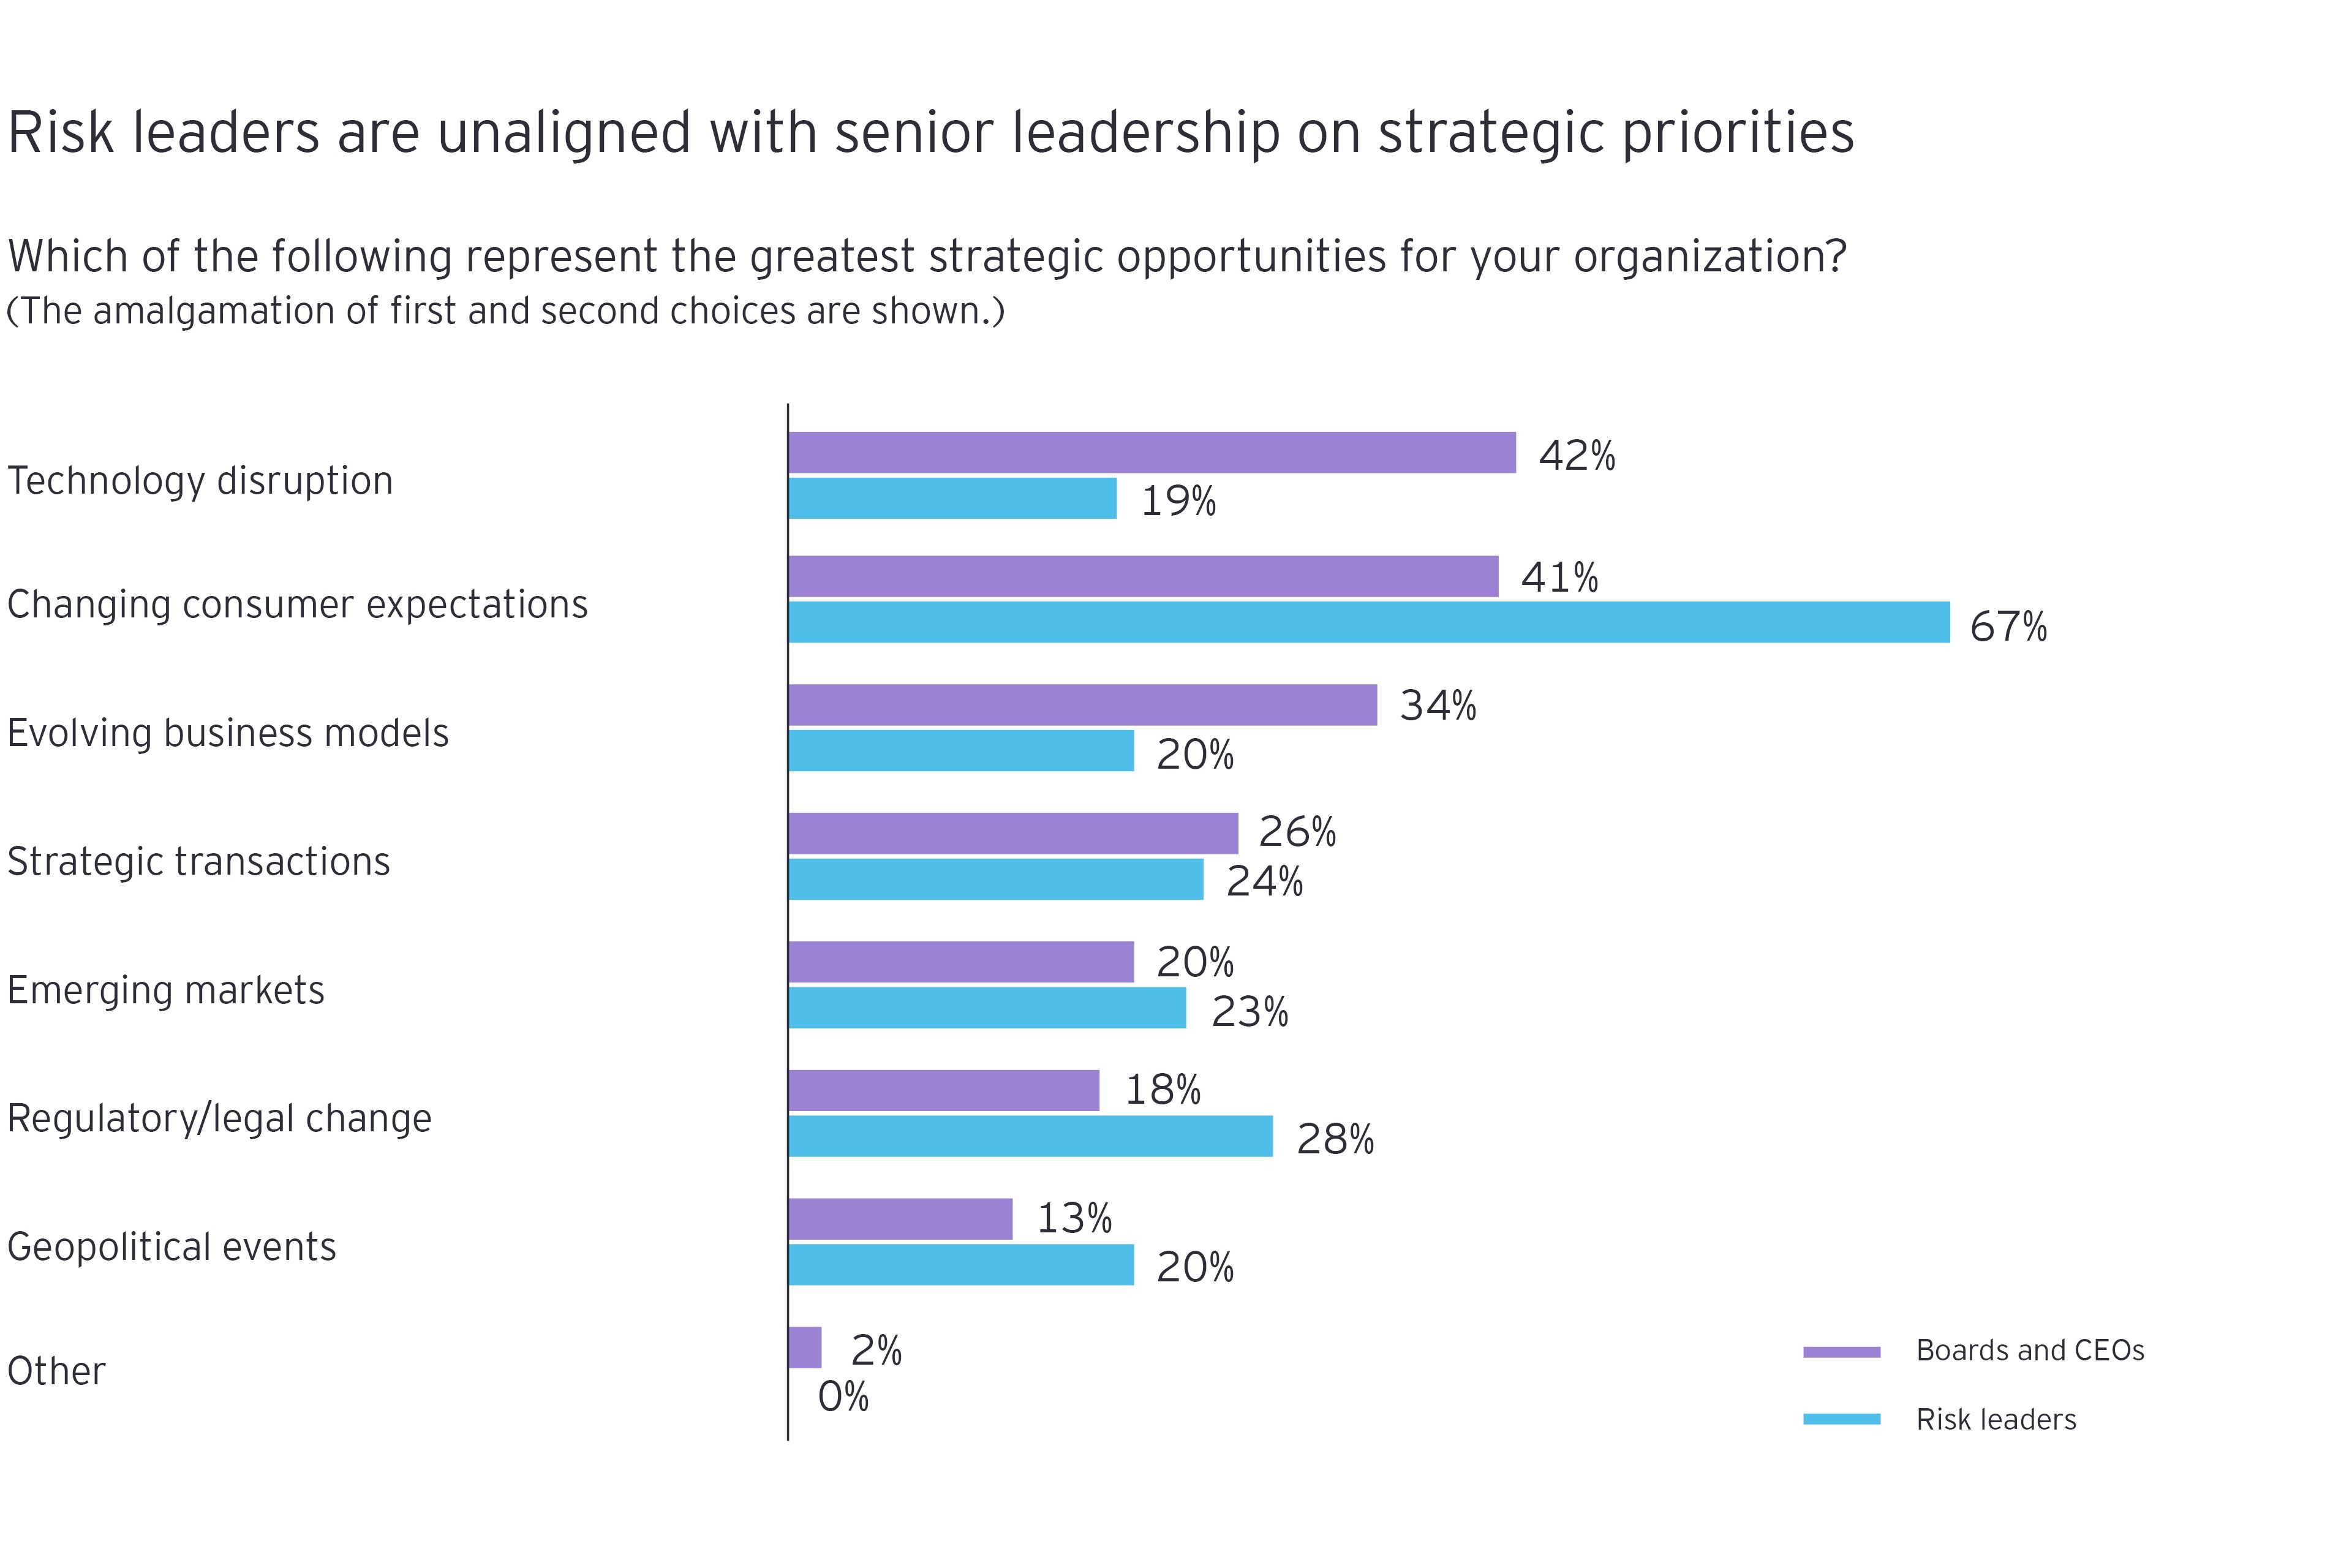 Chart showing difference in responses between chief risk officers and senior leadership to “Which of the following represent the greatest strategic opportunities for your organization?”